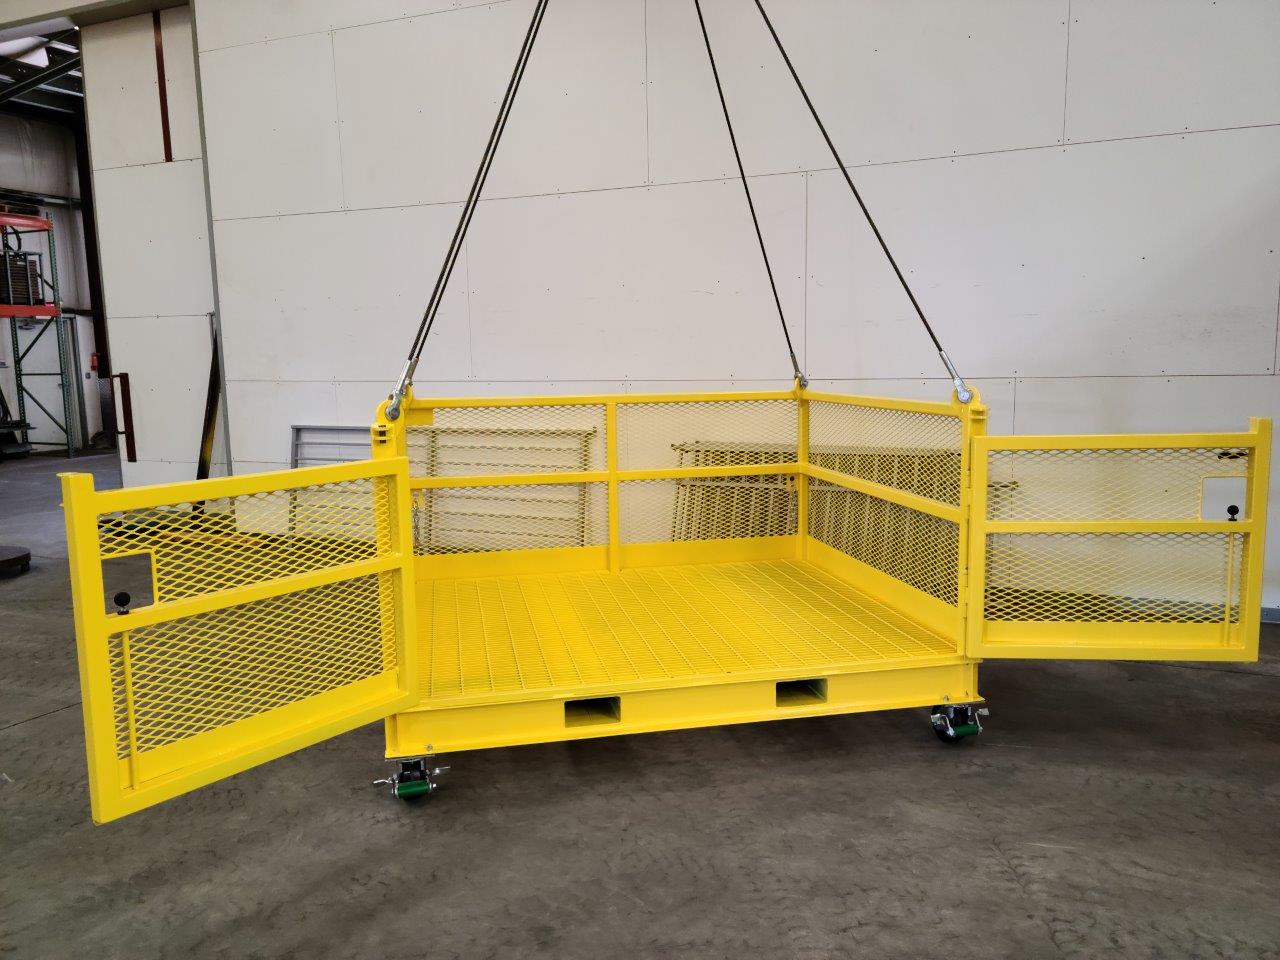 Custom Material Platform With Double Gates. Back view, open gates